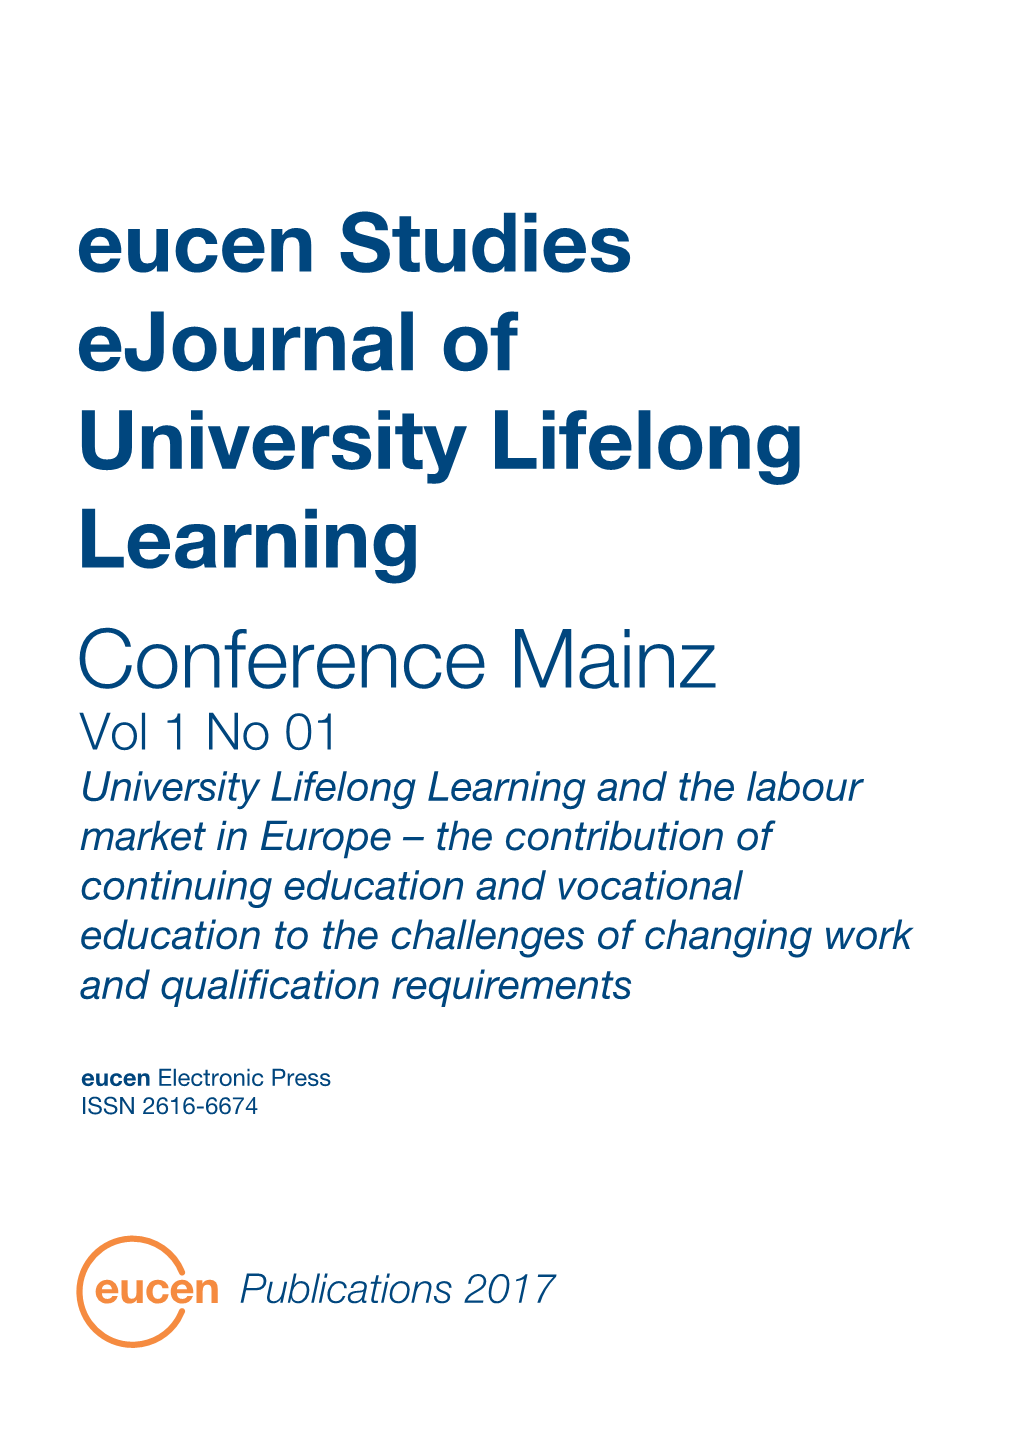 Eucen Studies Ejournal of University Lifelong Learning Conference Mainz